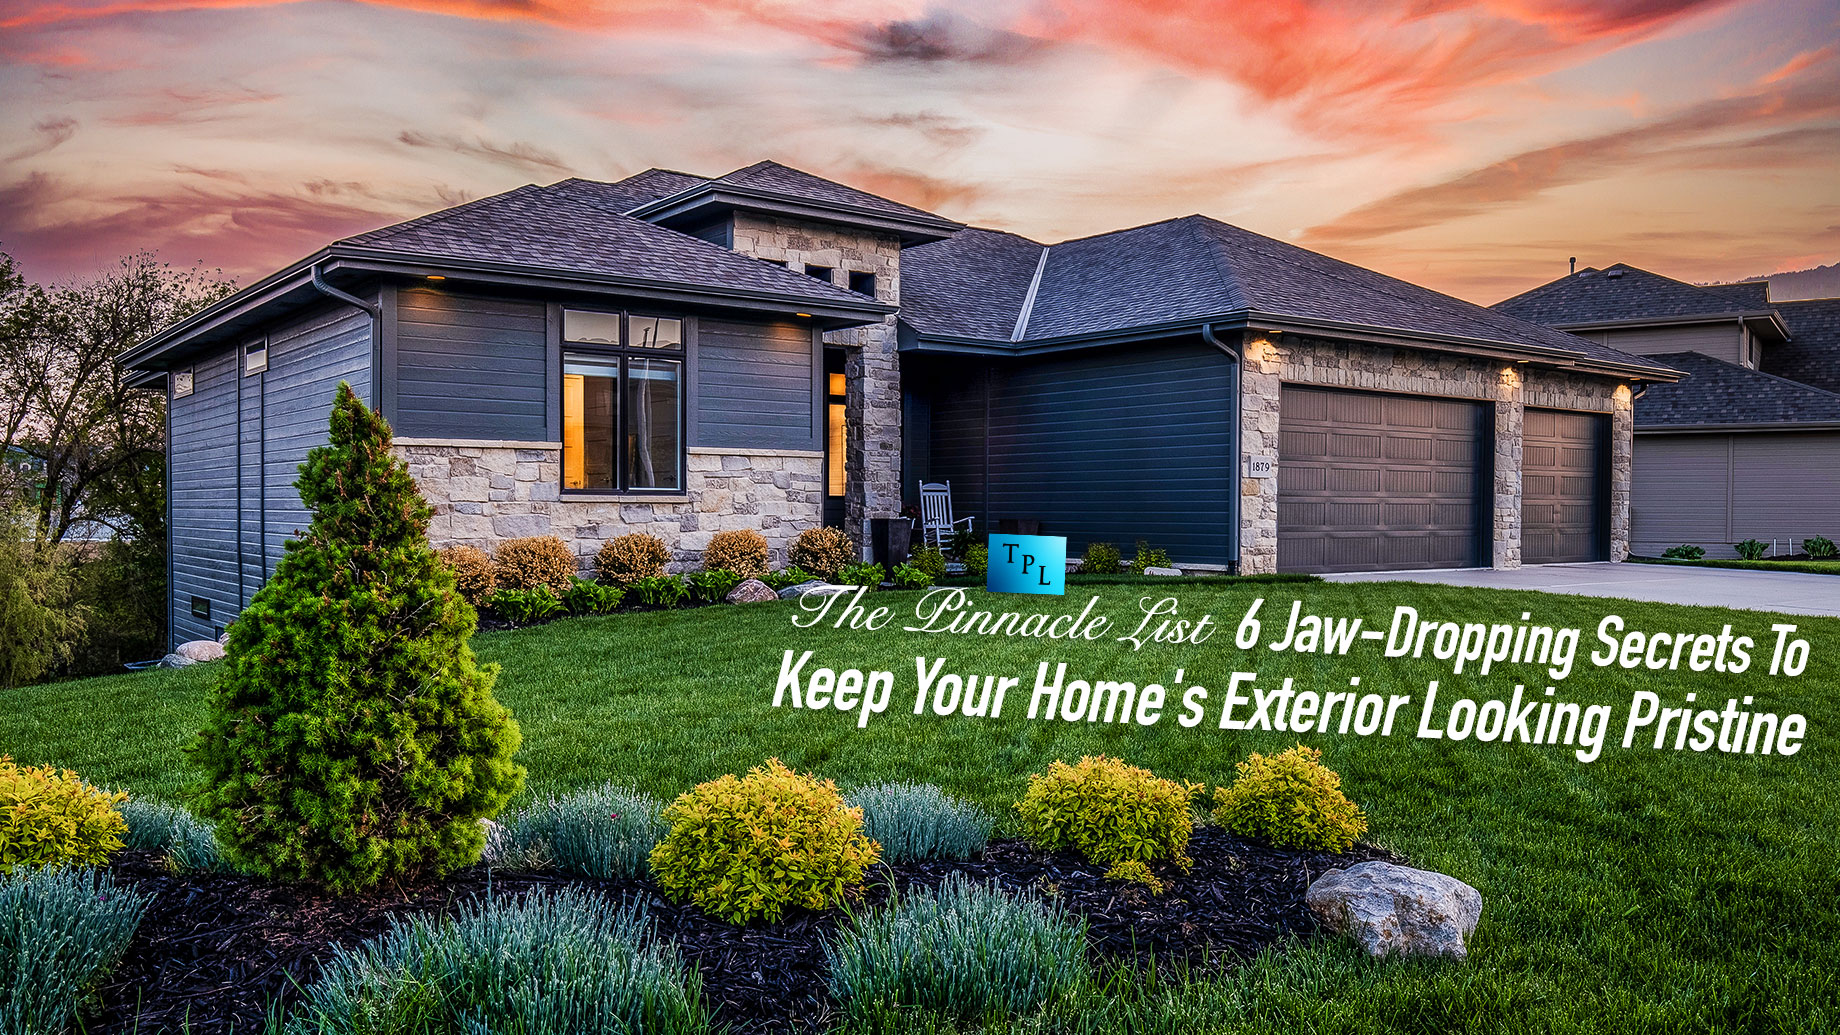 6 Jaw-Dropping Secrets To Keep Your Home's Exterior Looking Pristine